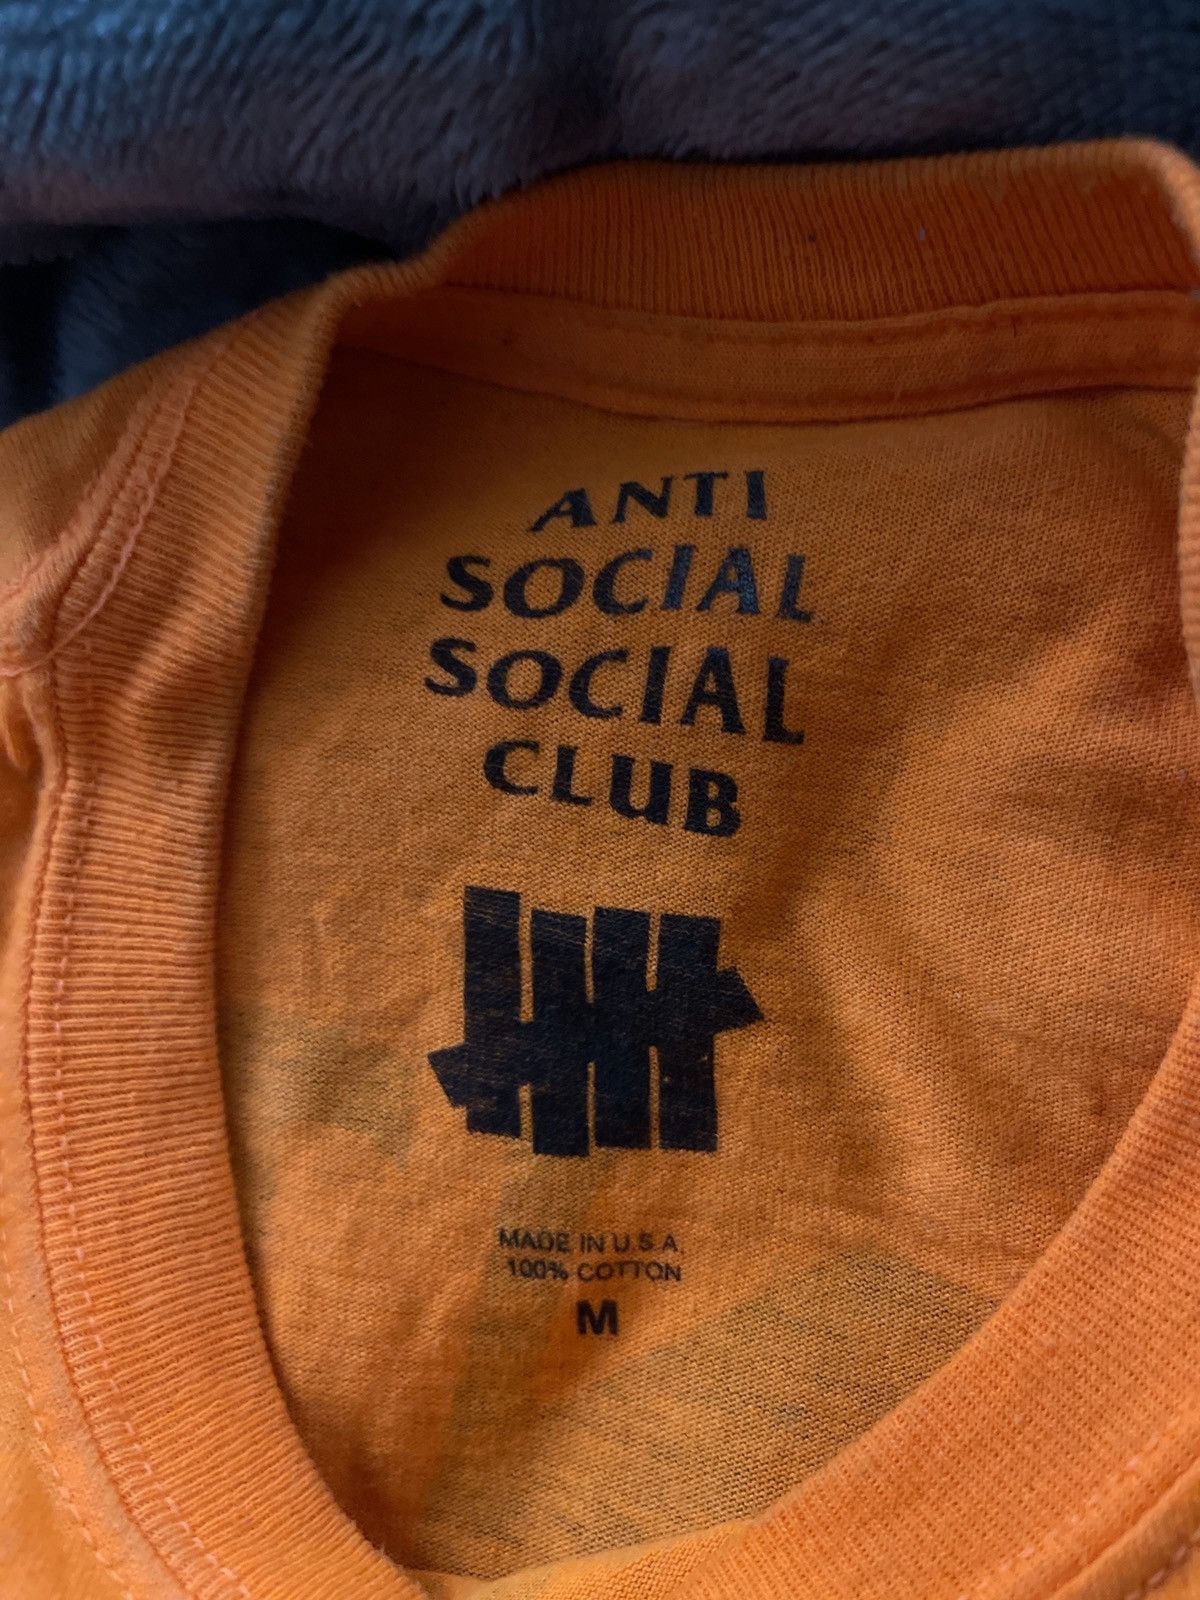 Undefeated M Undefeated x assc Orange Paranoid Tee Size US M / EU 48-50 / 2 - 6 Preview